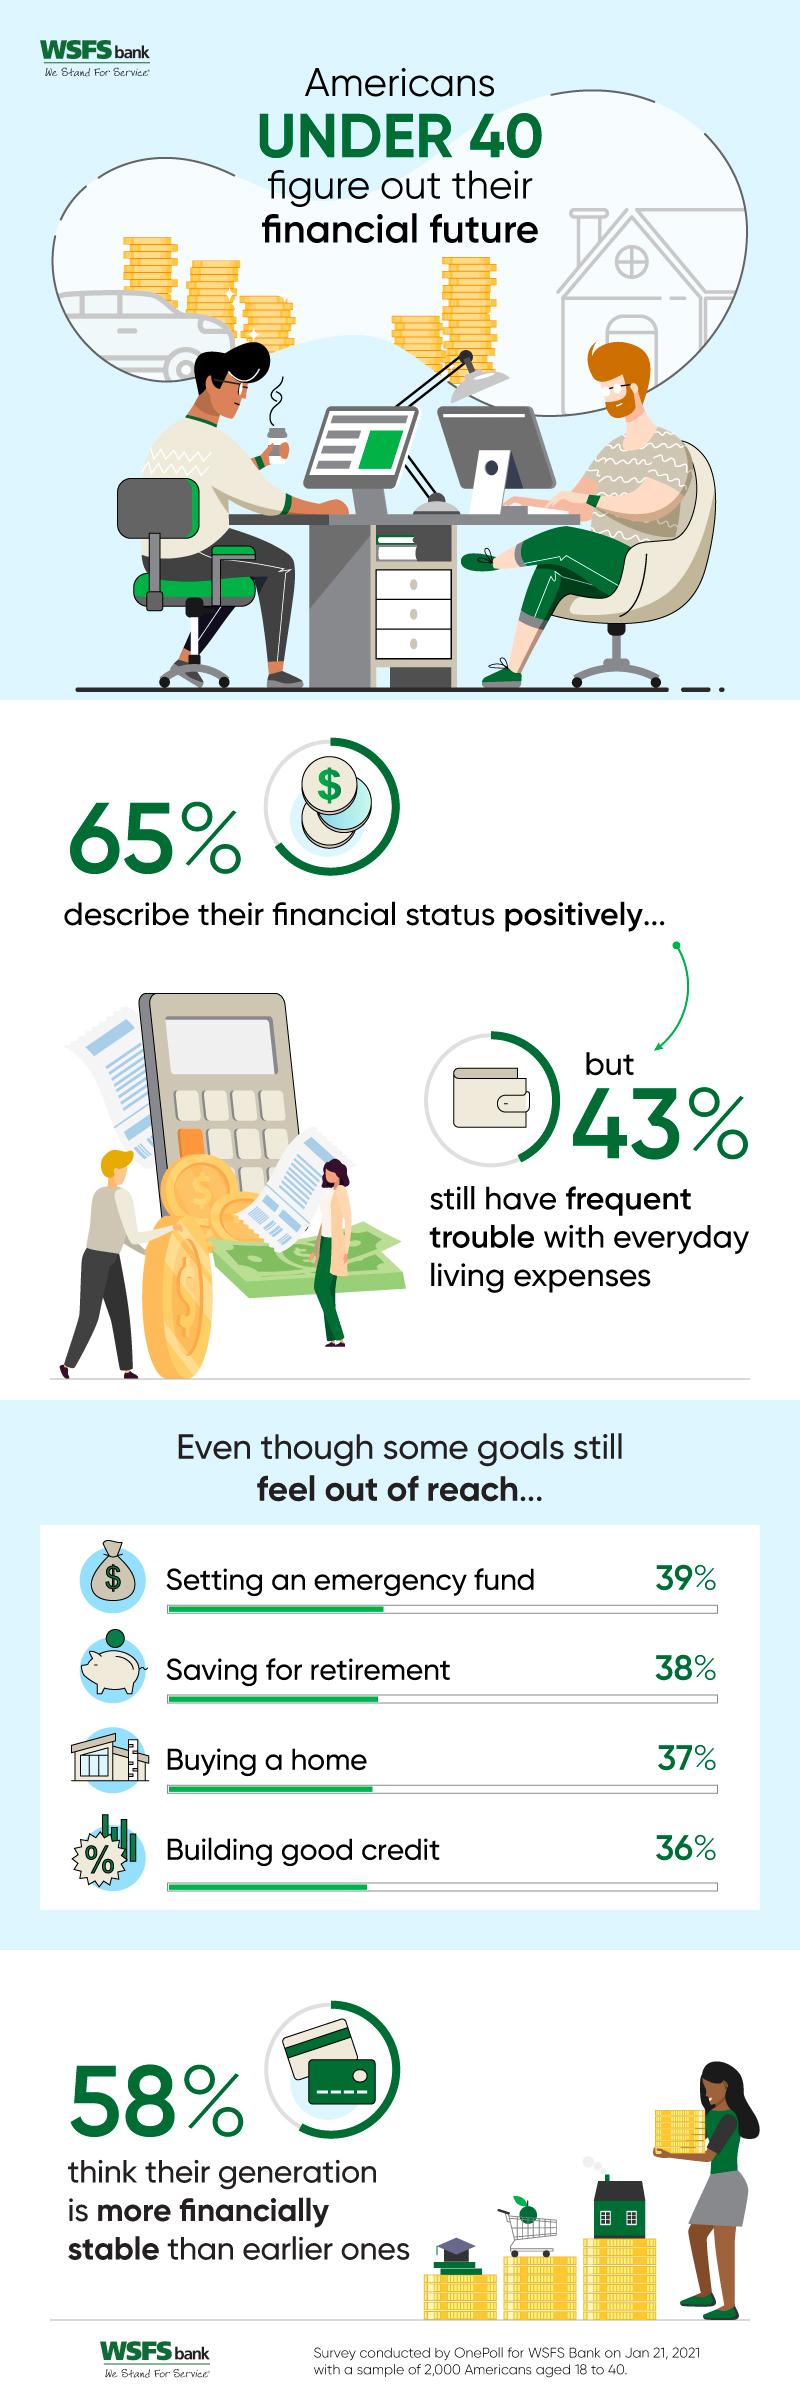 WSFS Bank Study Finds Millennials and Gen Zers View Their Overall Financial Situations Positively